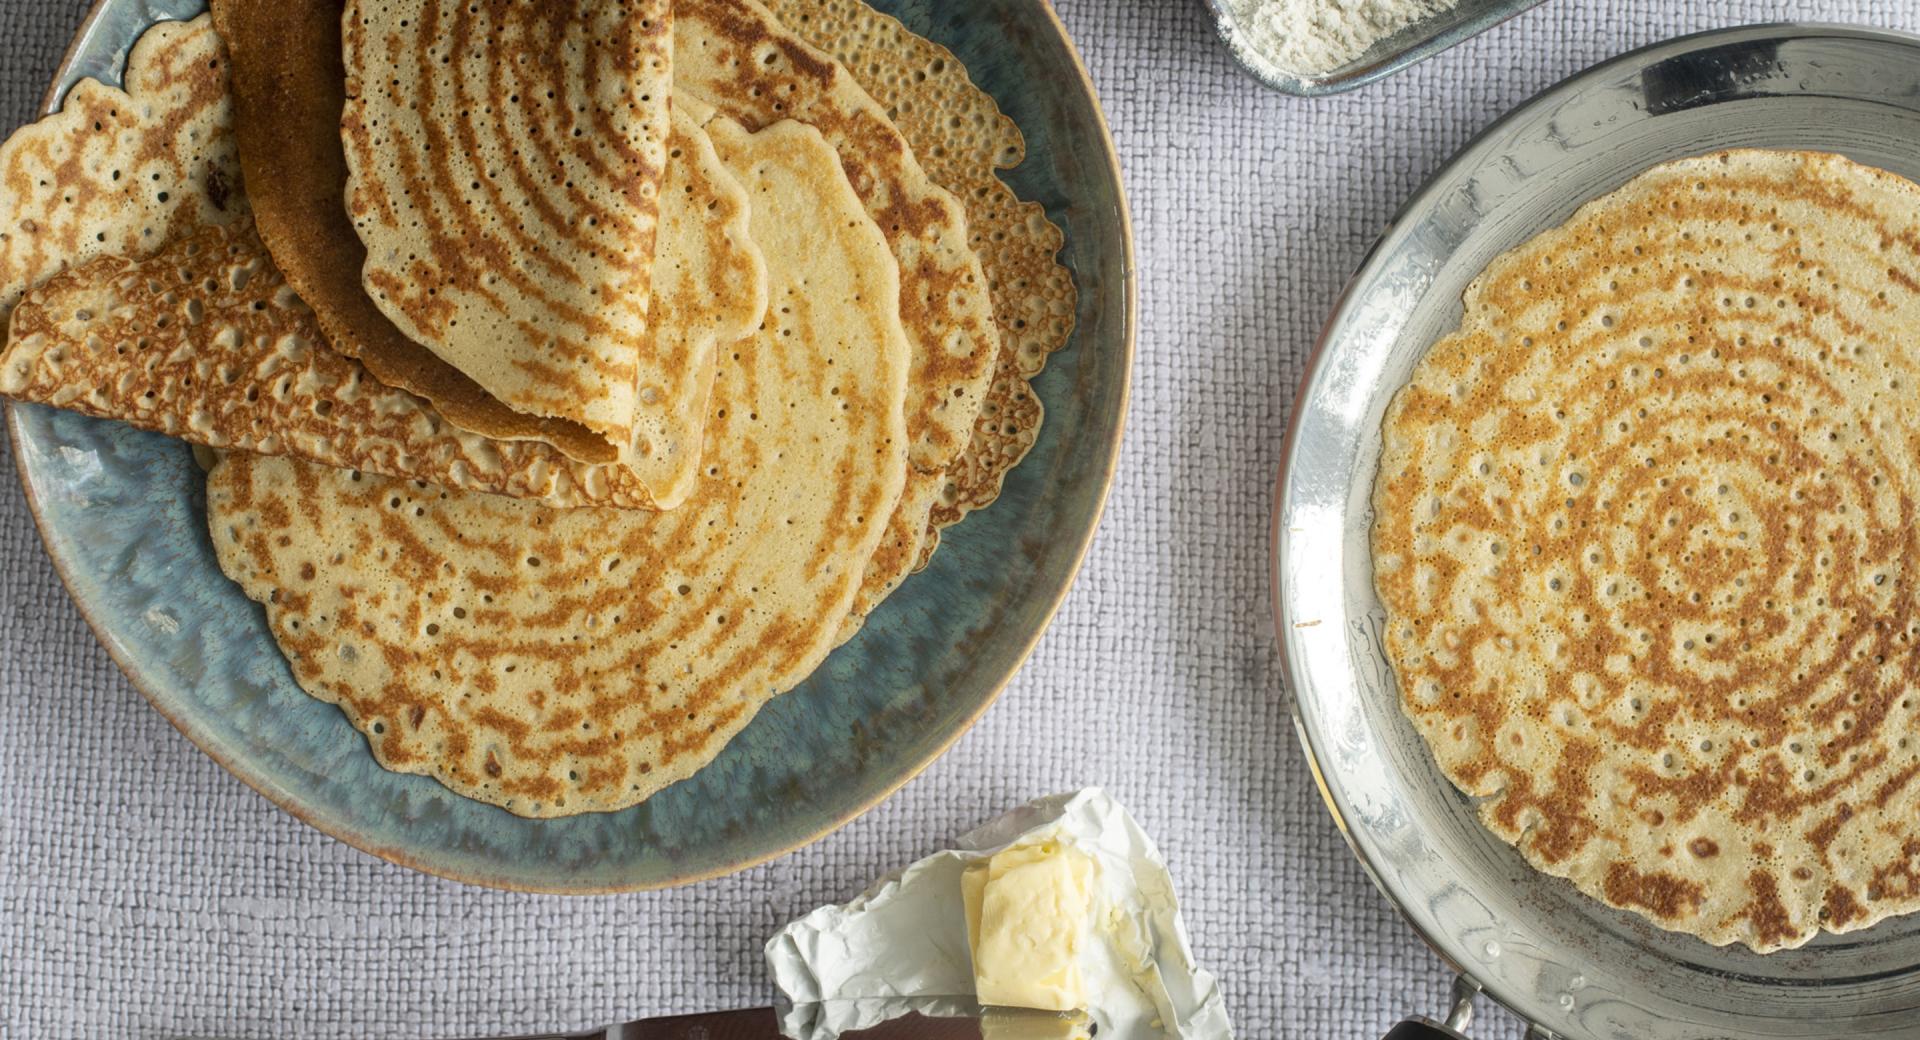 Buckwheat crepes (galettes)